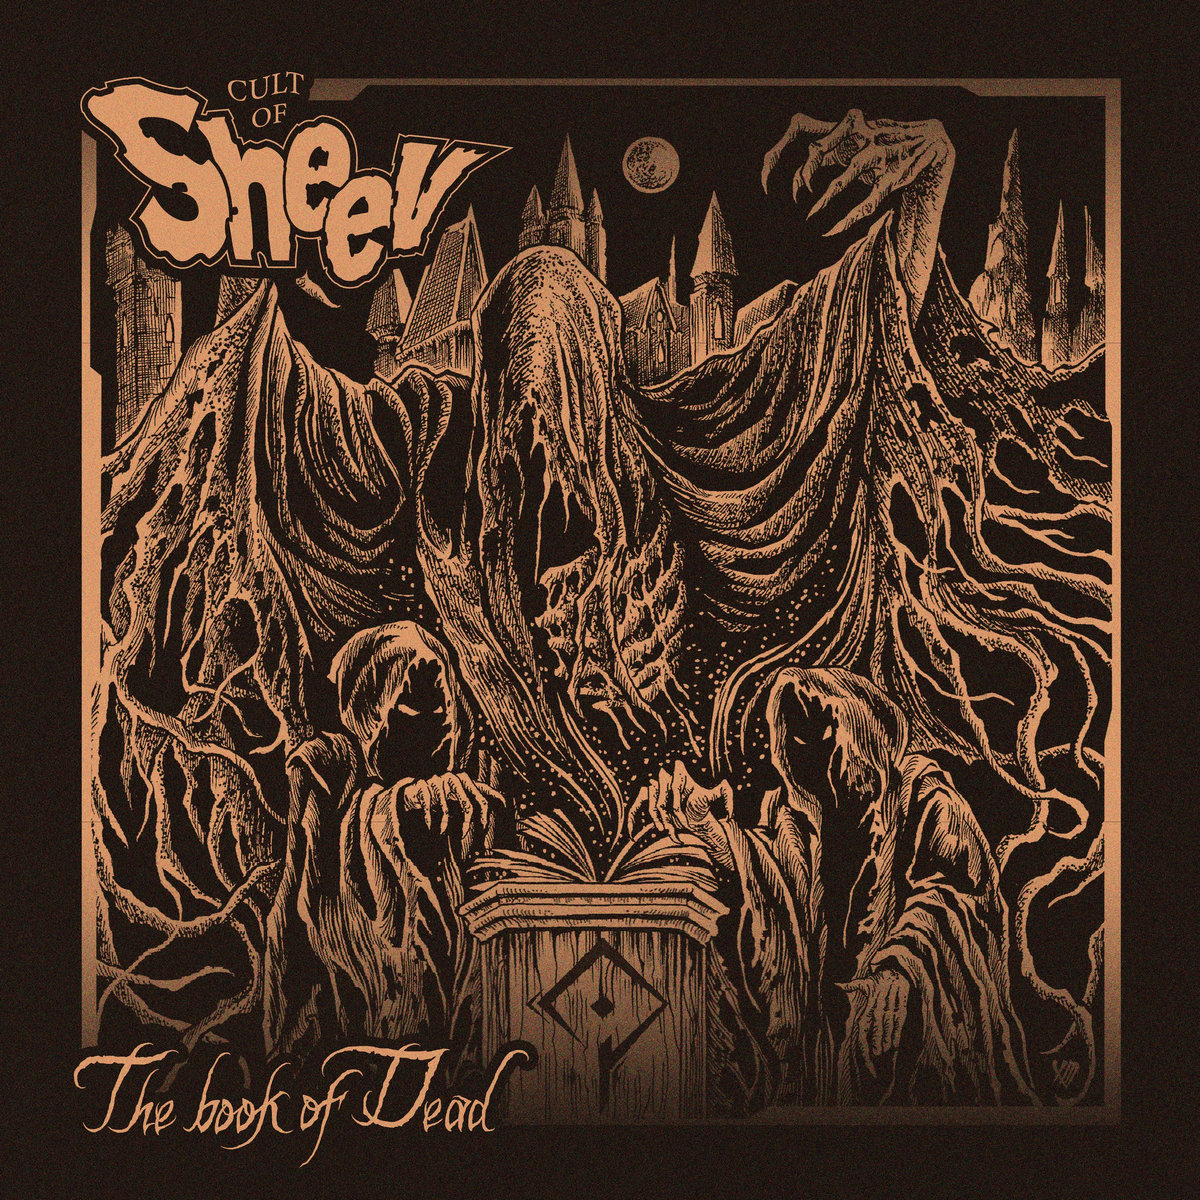 Cult Of Sheev - "The Book Of Dead" - 2023